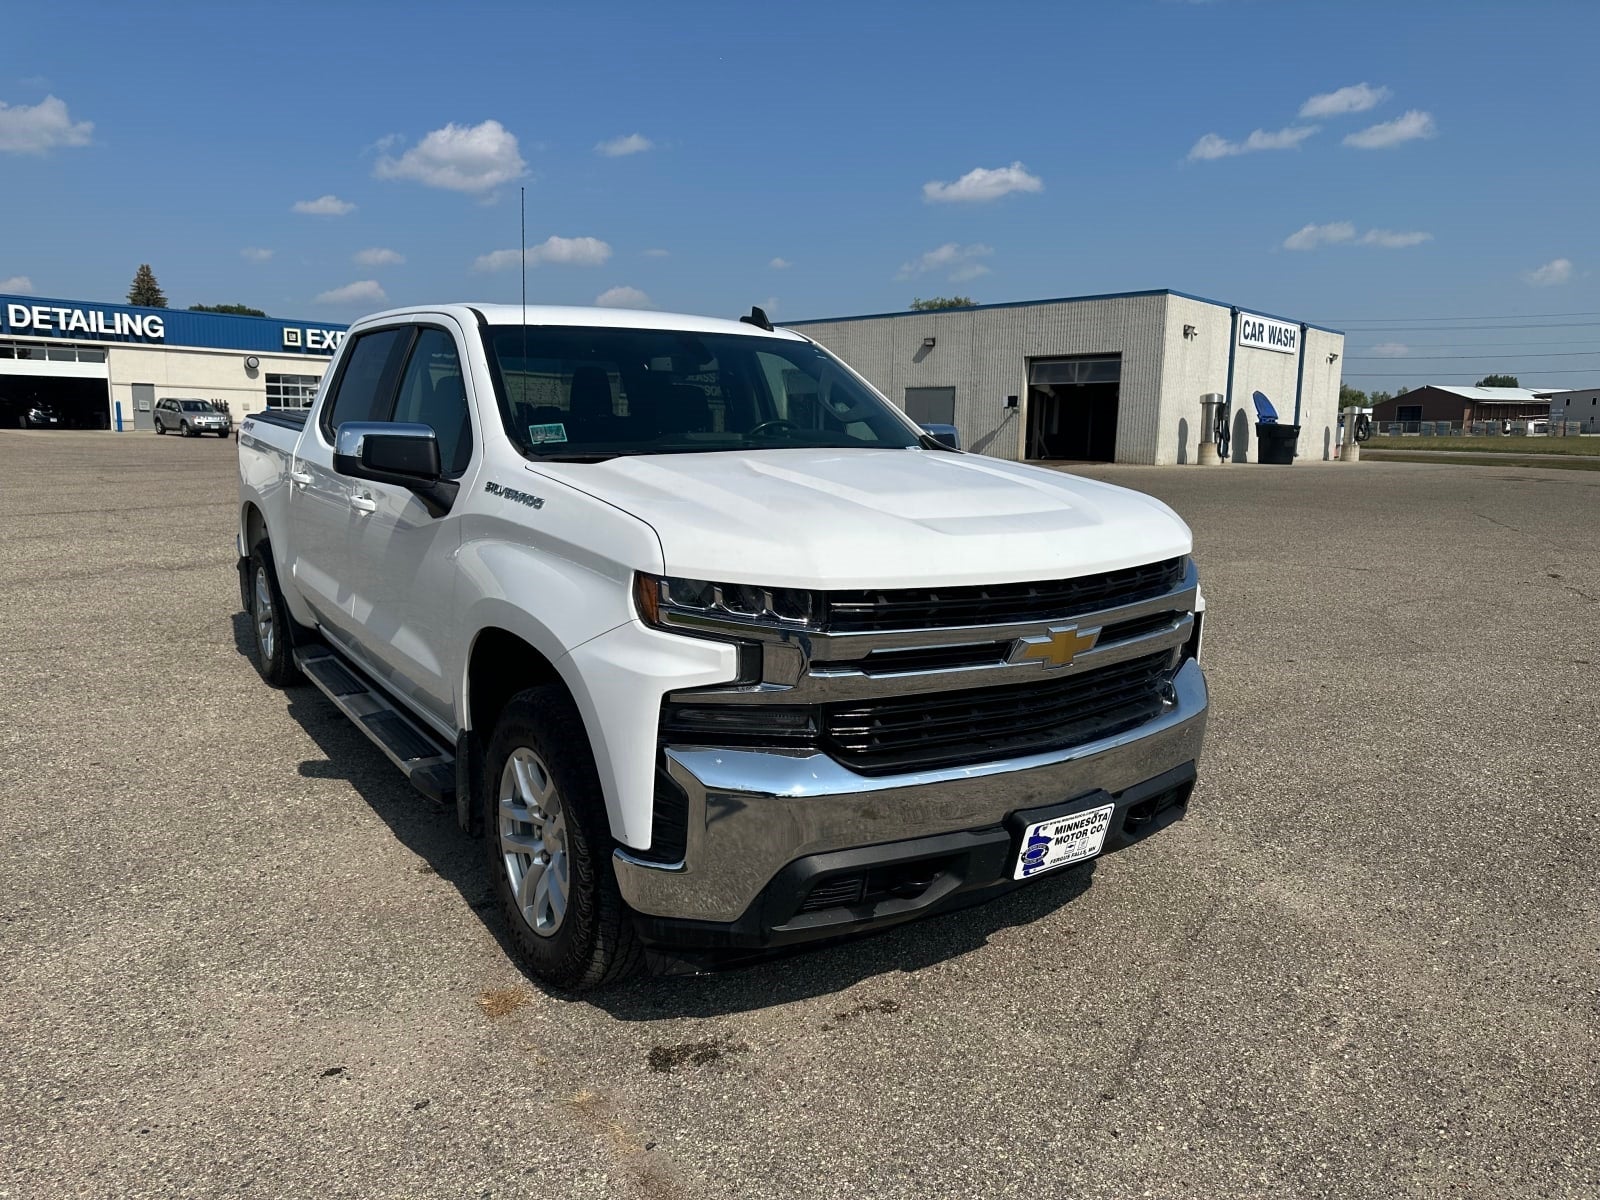 Used 2020 Chevrolet Silverado 1500 LT with VIN 3GCUYDED0LG402565 for sale in Fergus Falls, Minnesota